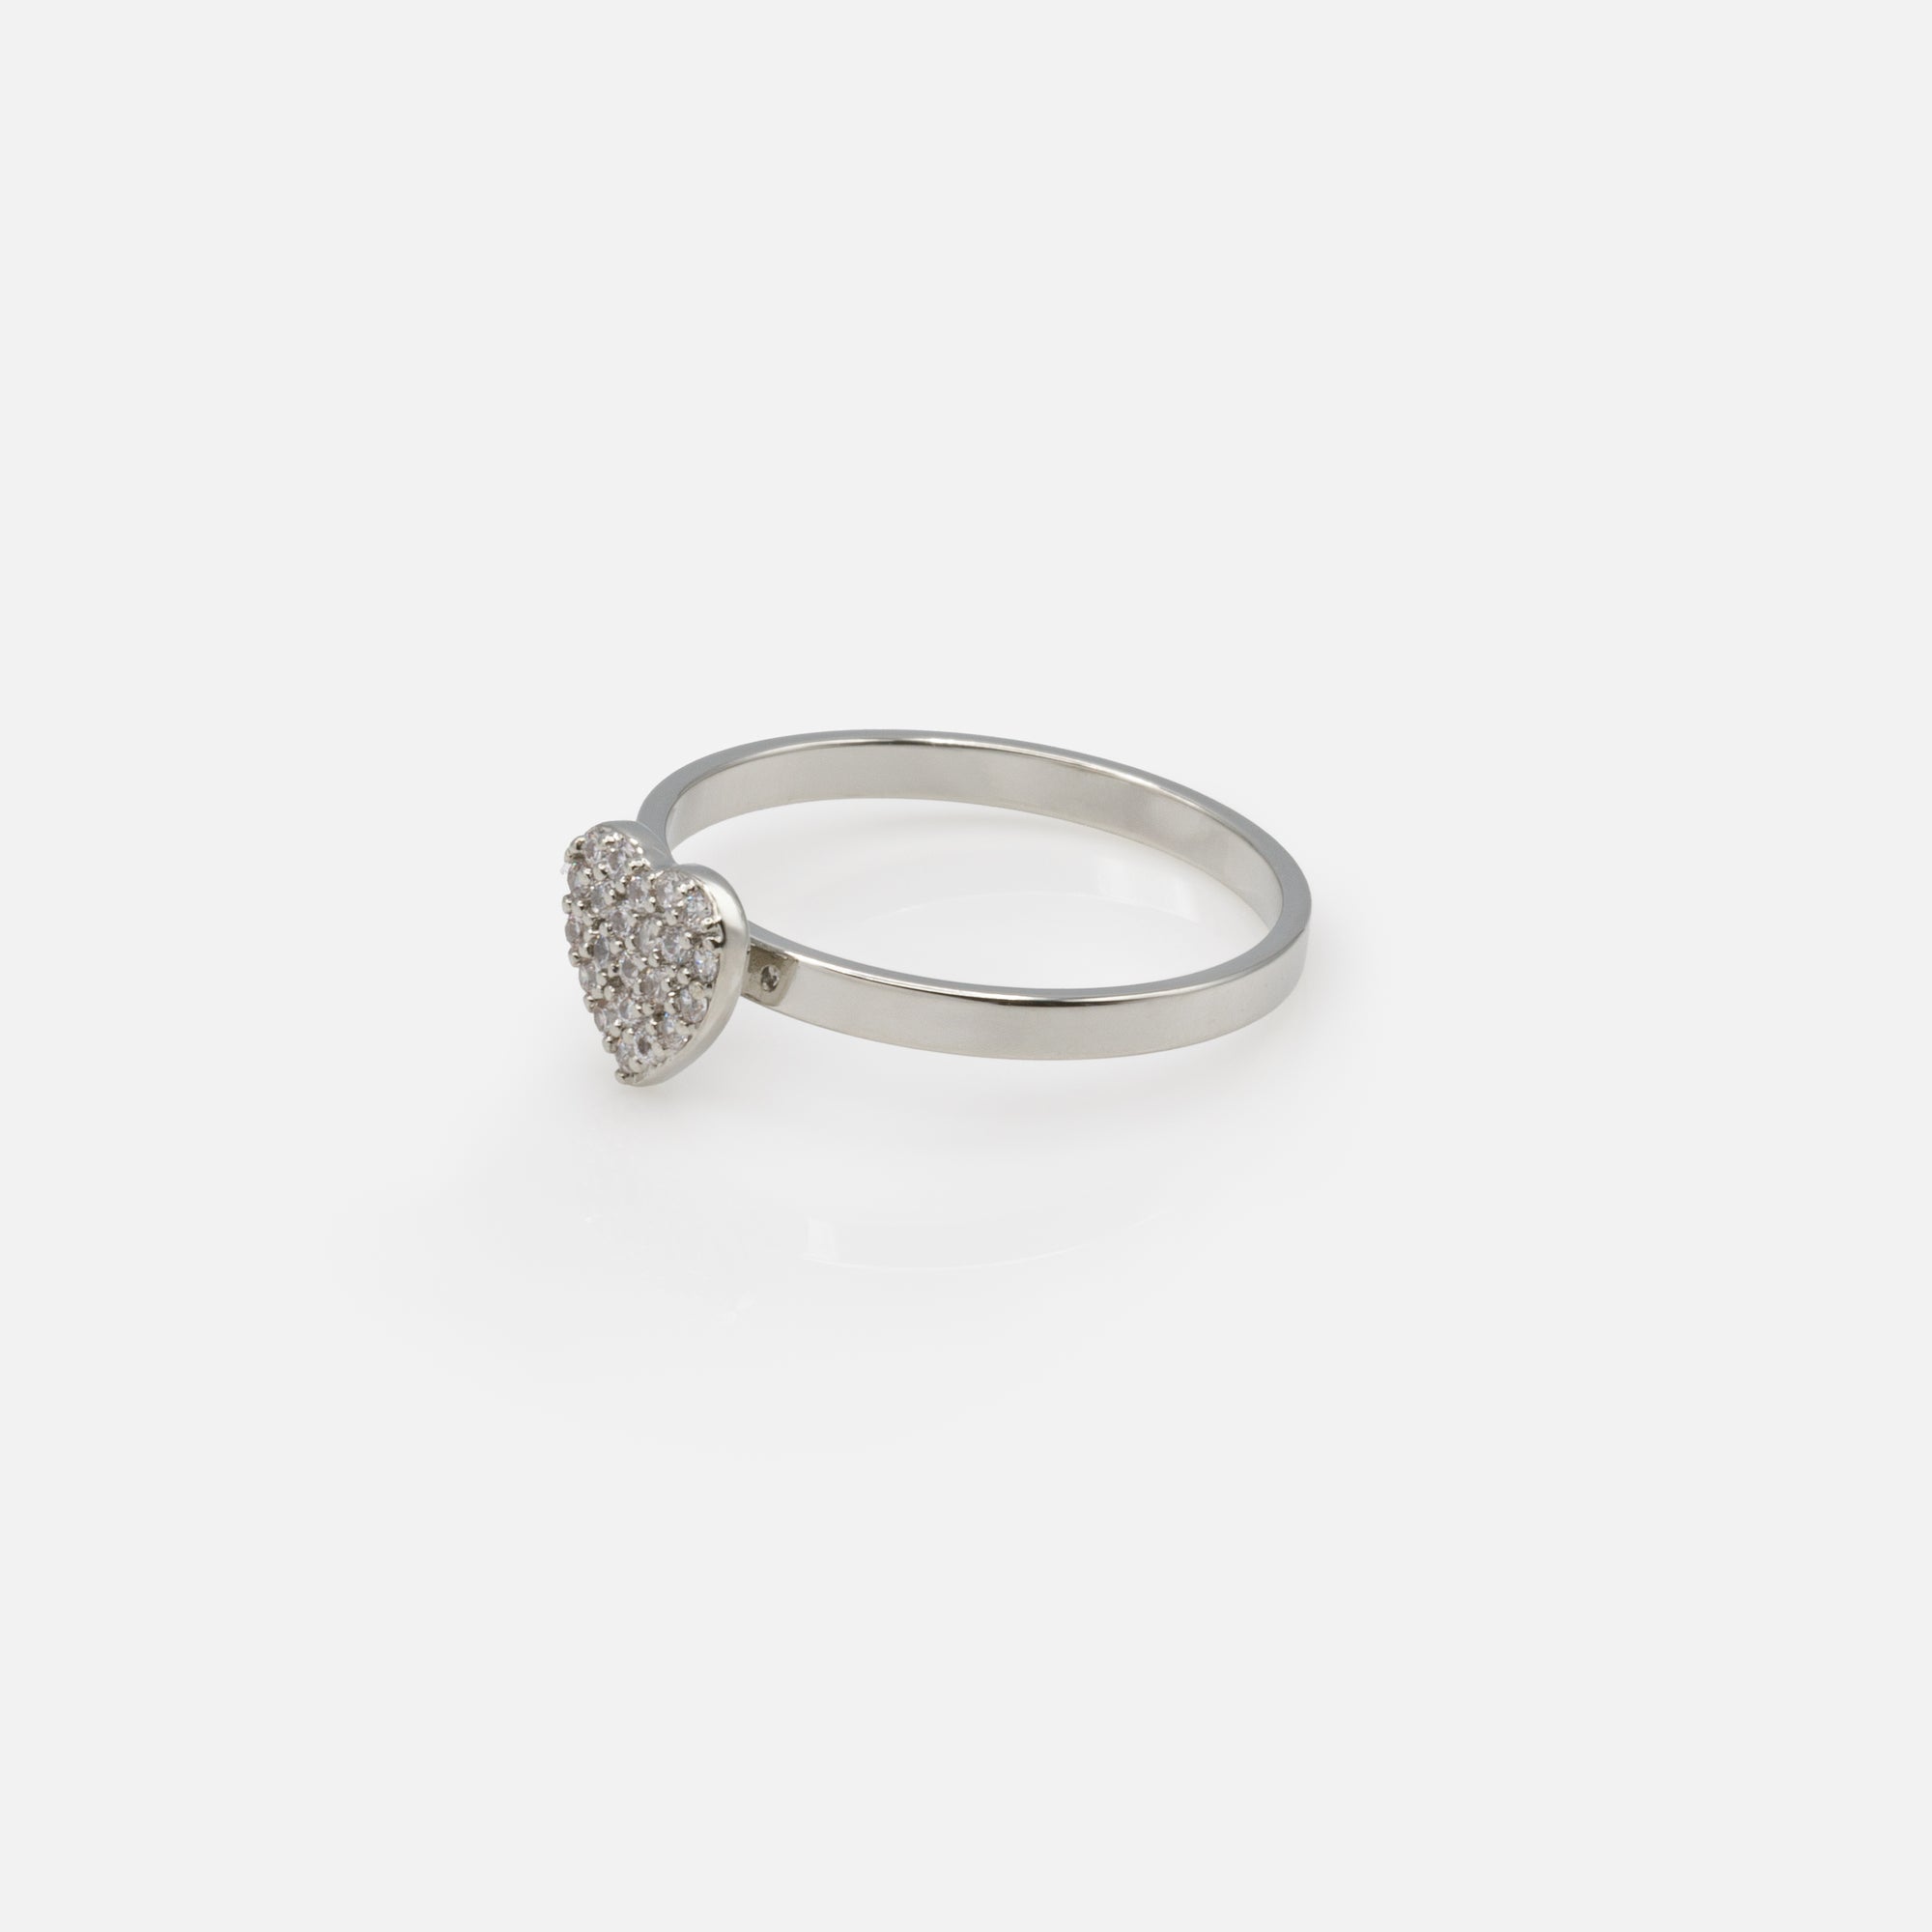 Silver ring with heart adorned with cubic zirconia